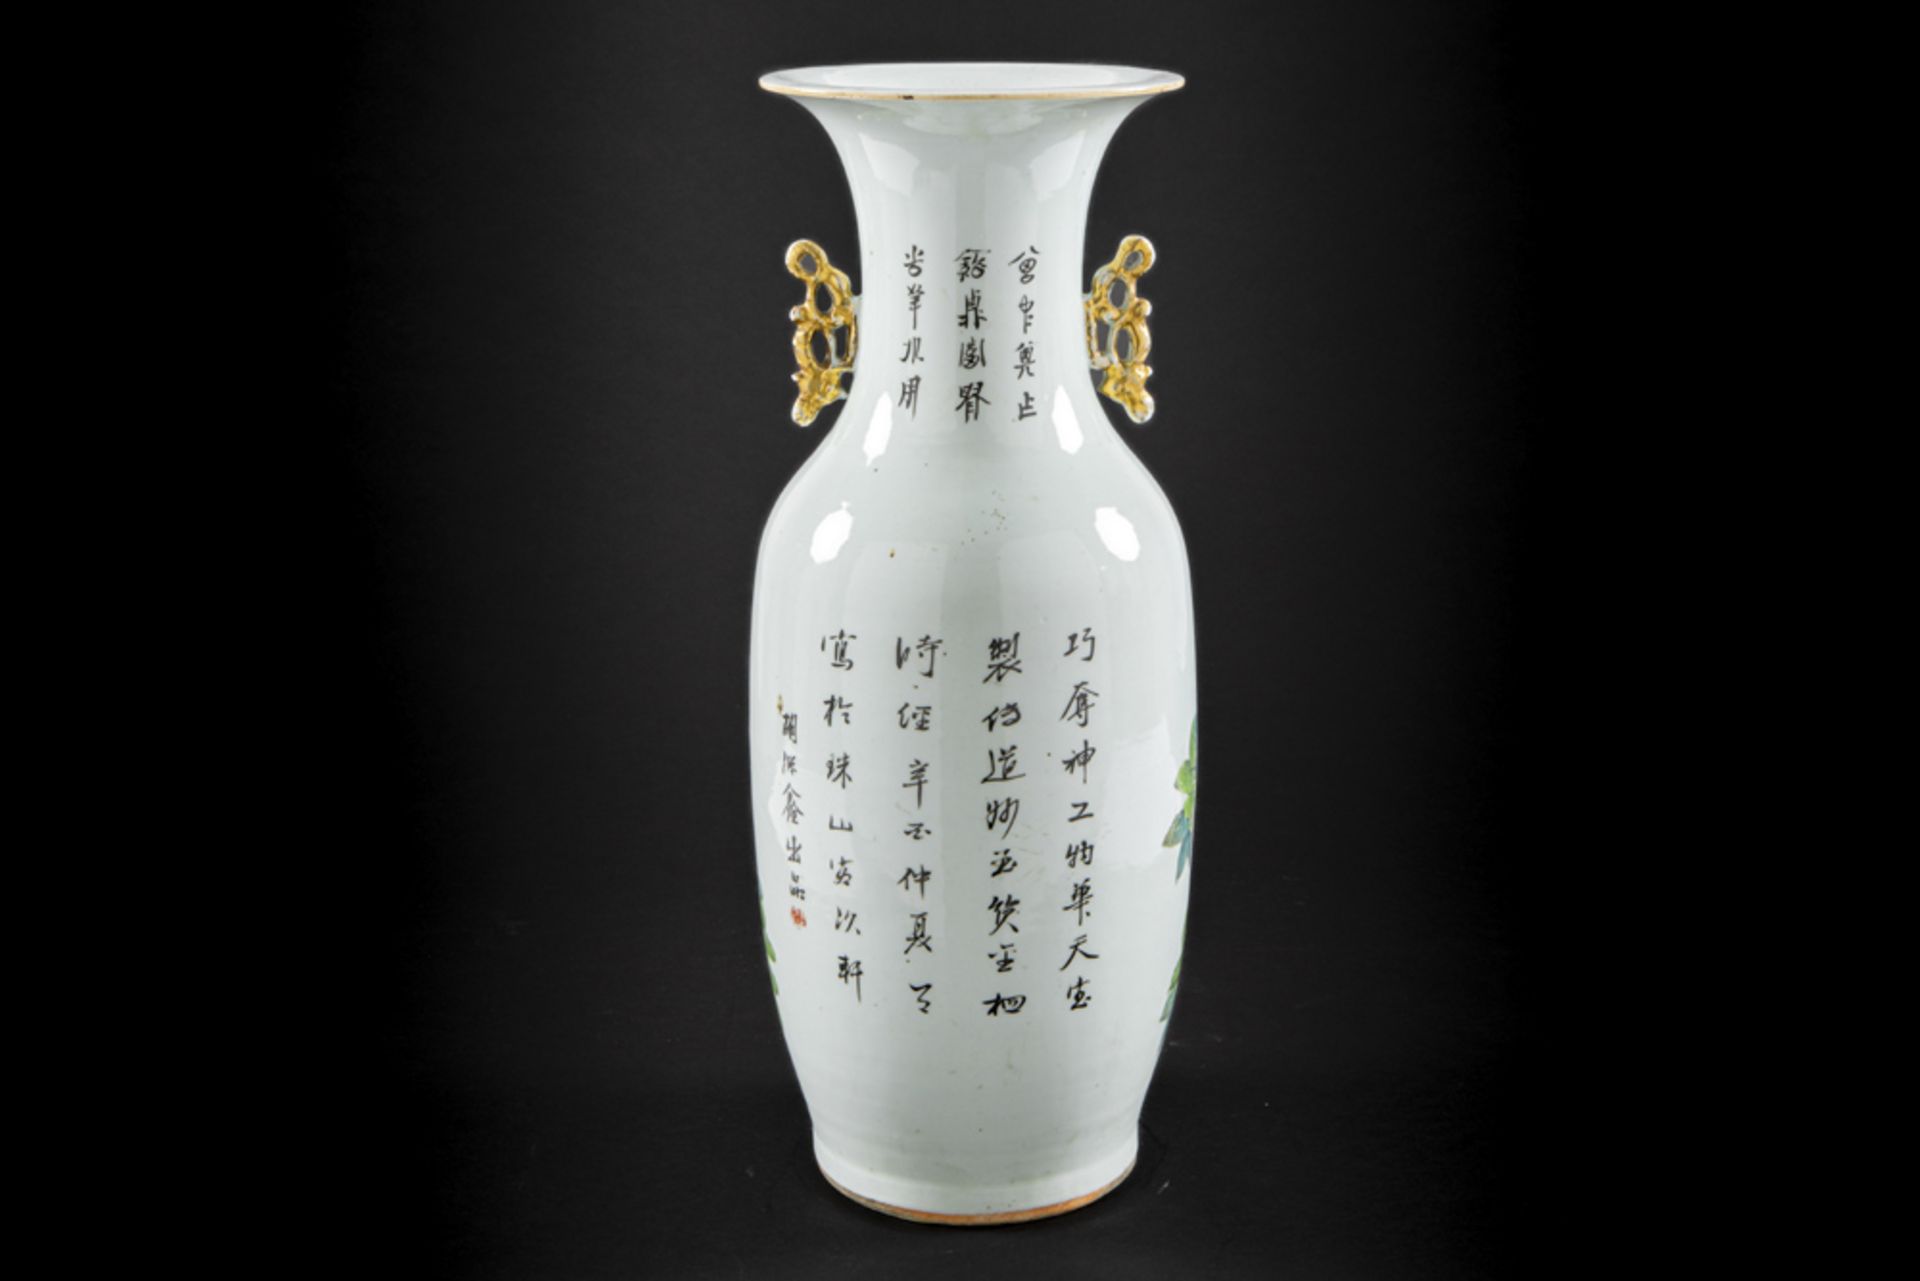 Chinese Republic period vase in porcelain with a polychrome decor with flowers and birds || - Image 5 of 7